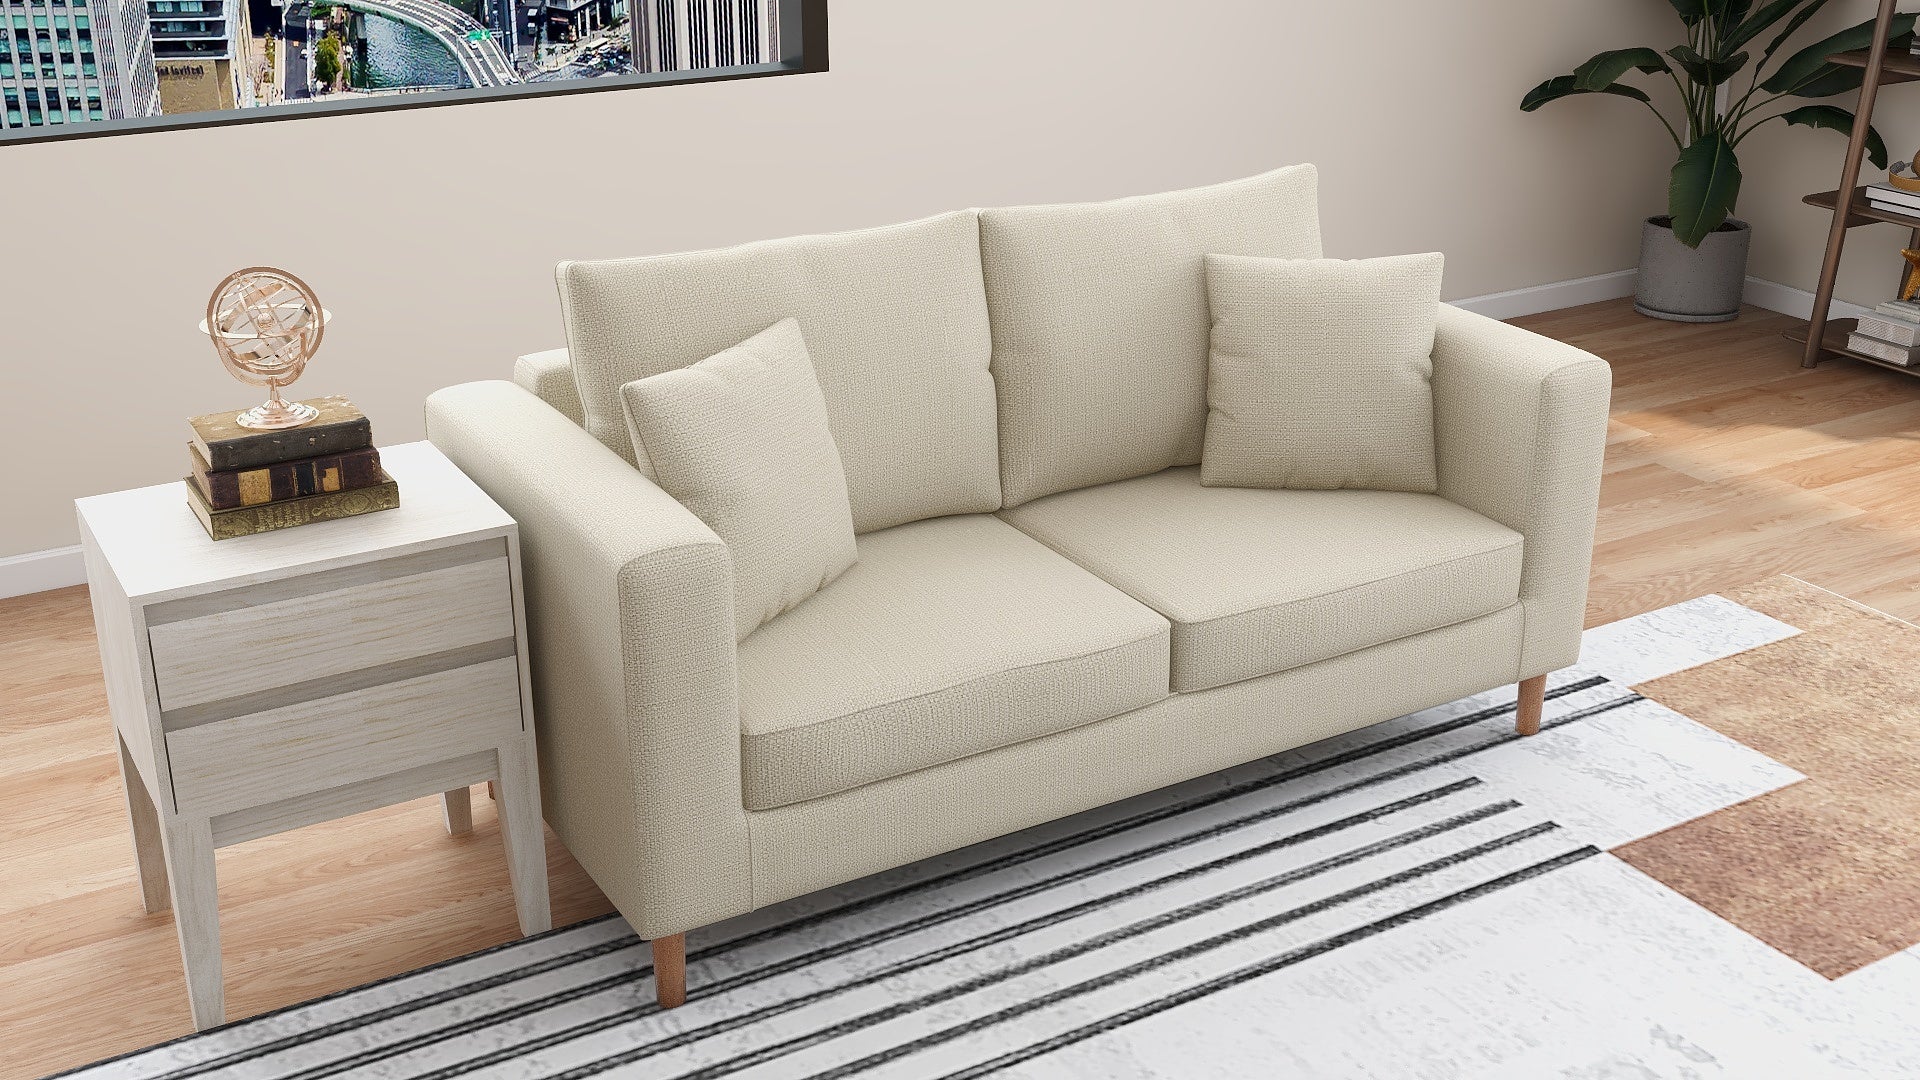 SANDY 2-Seater Fabric Sofa with Pillows AF Home